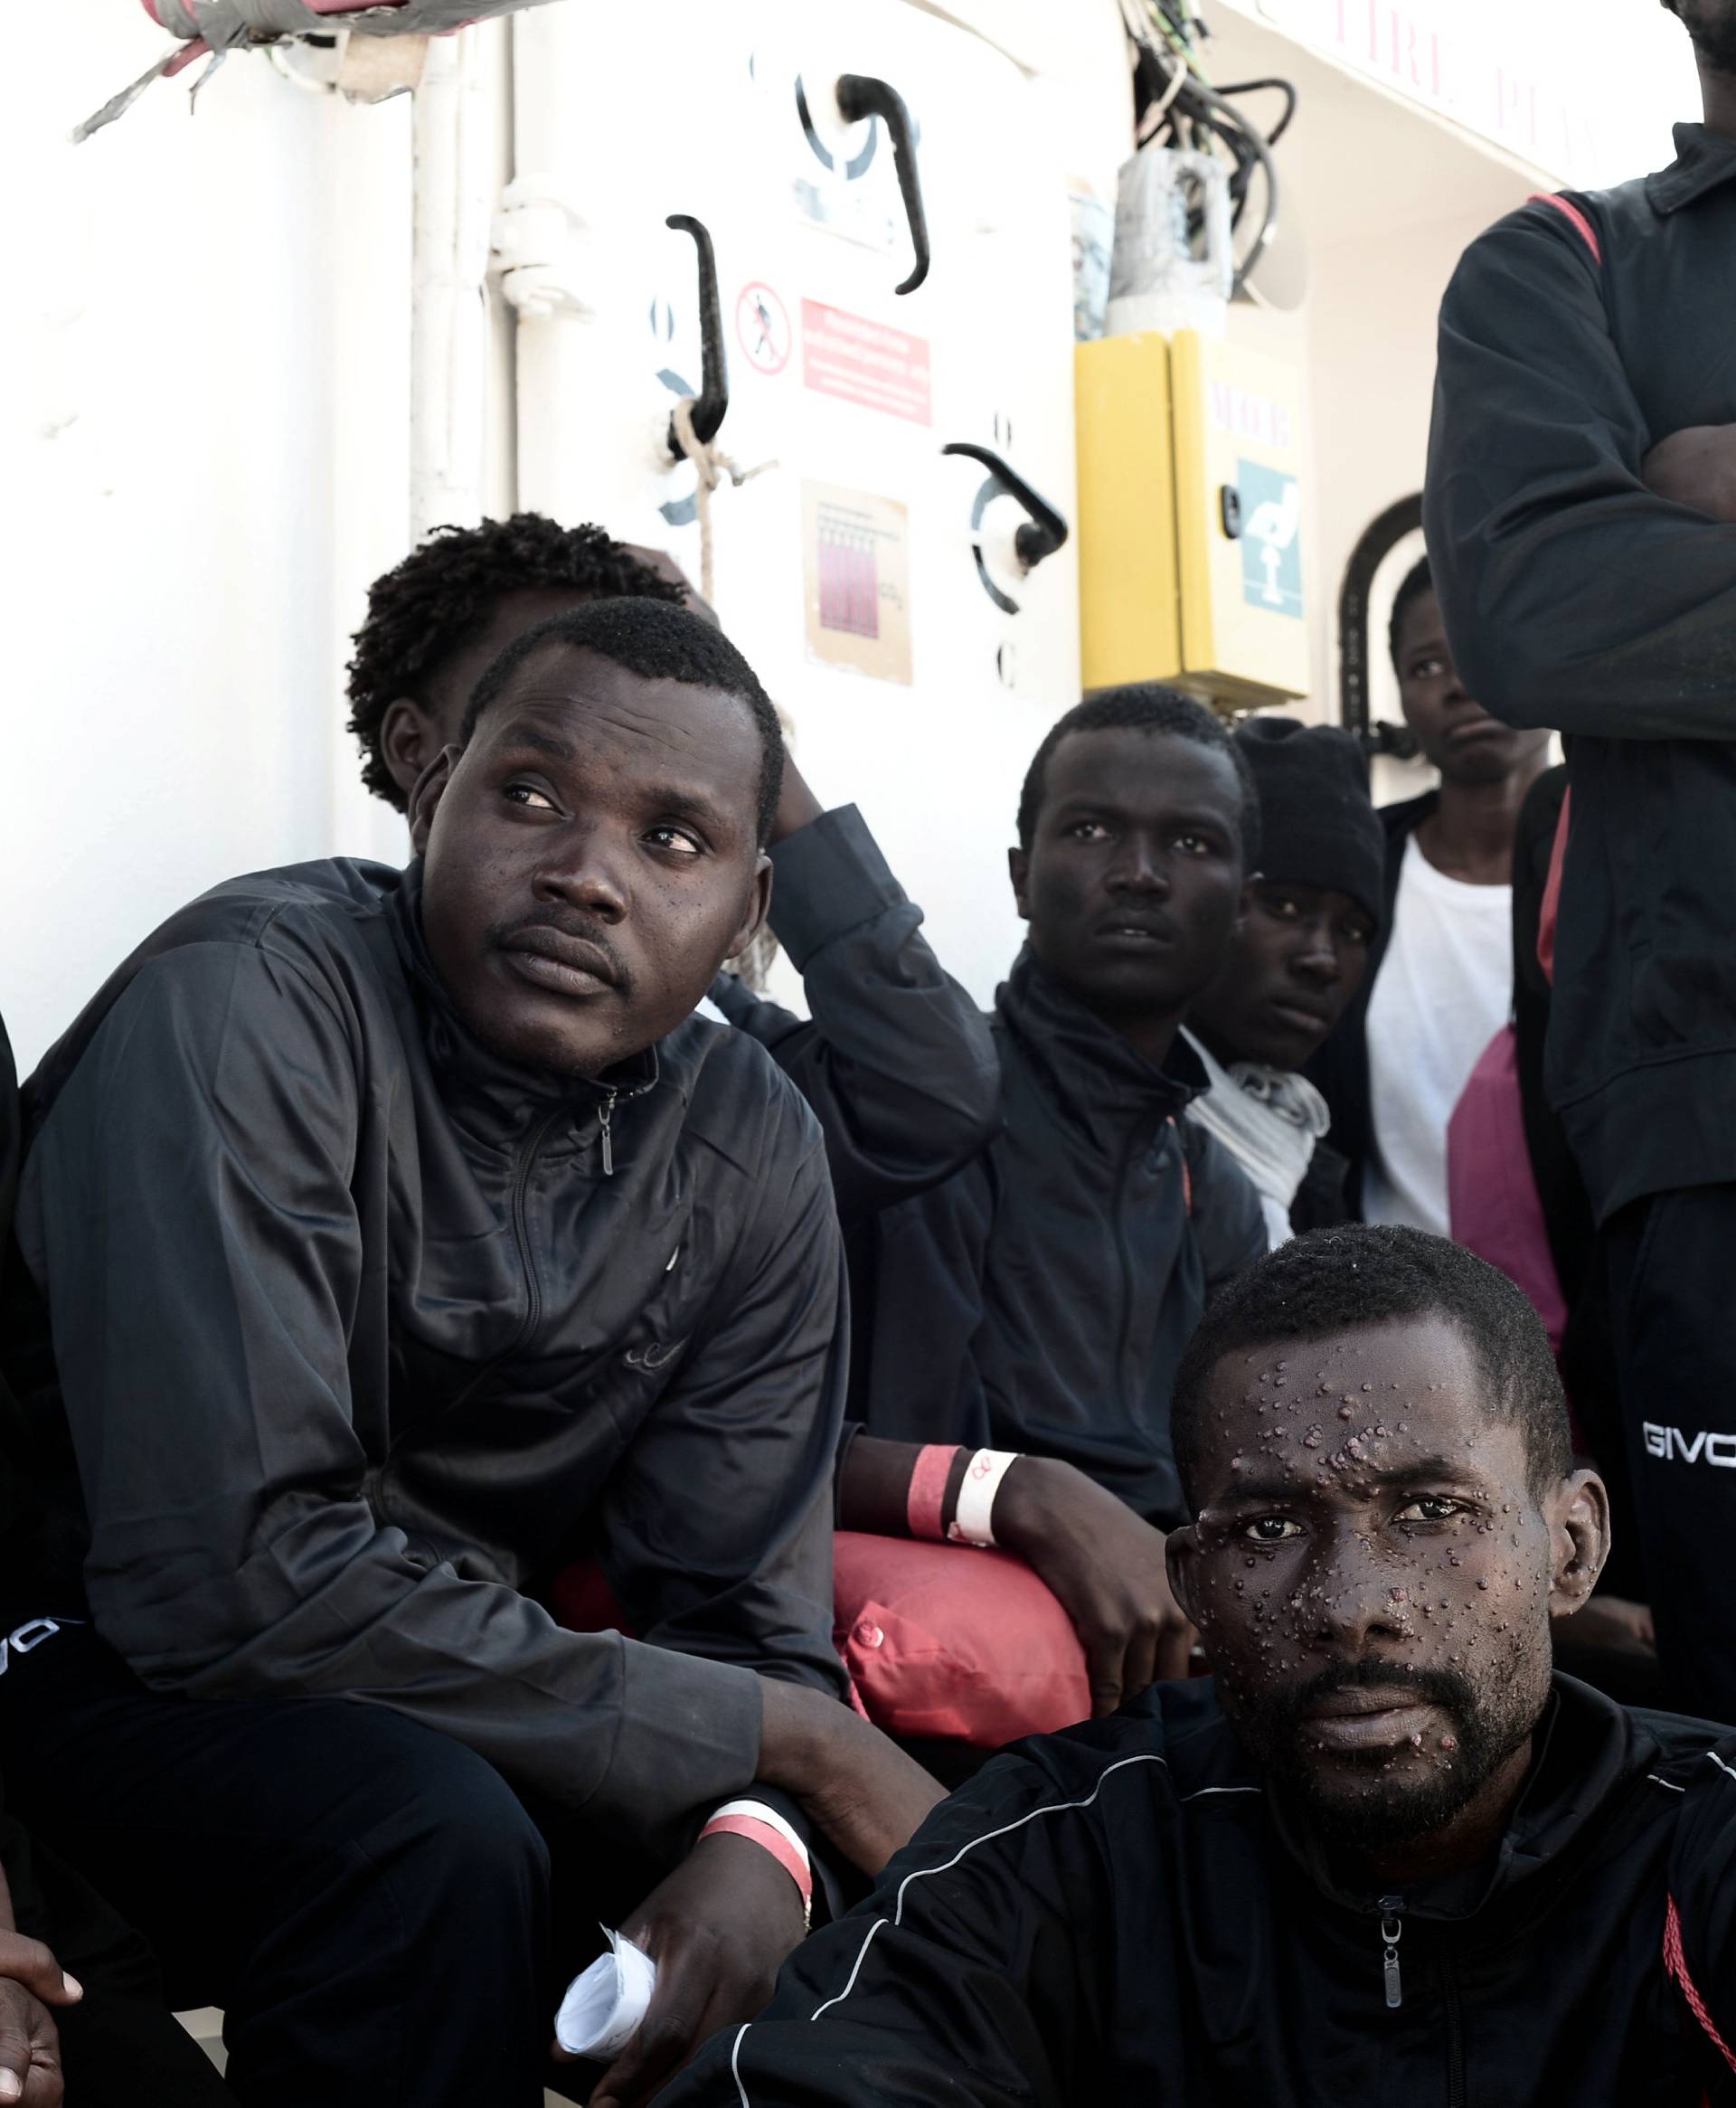 Migrants wait to disembark from the Aquarius rescue ship after arriving to port in Valencia